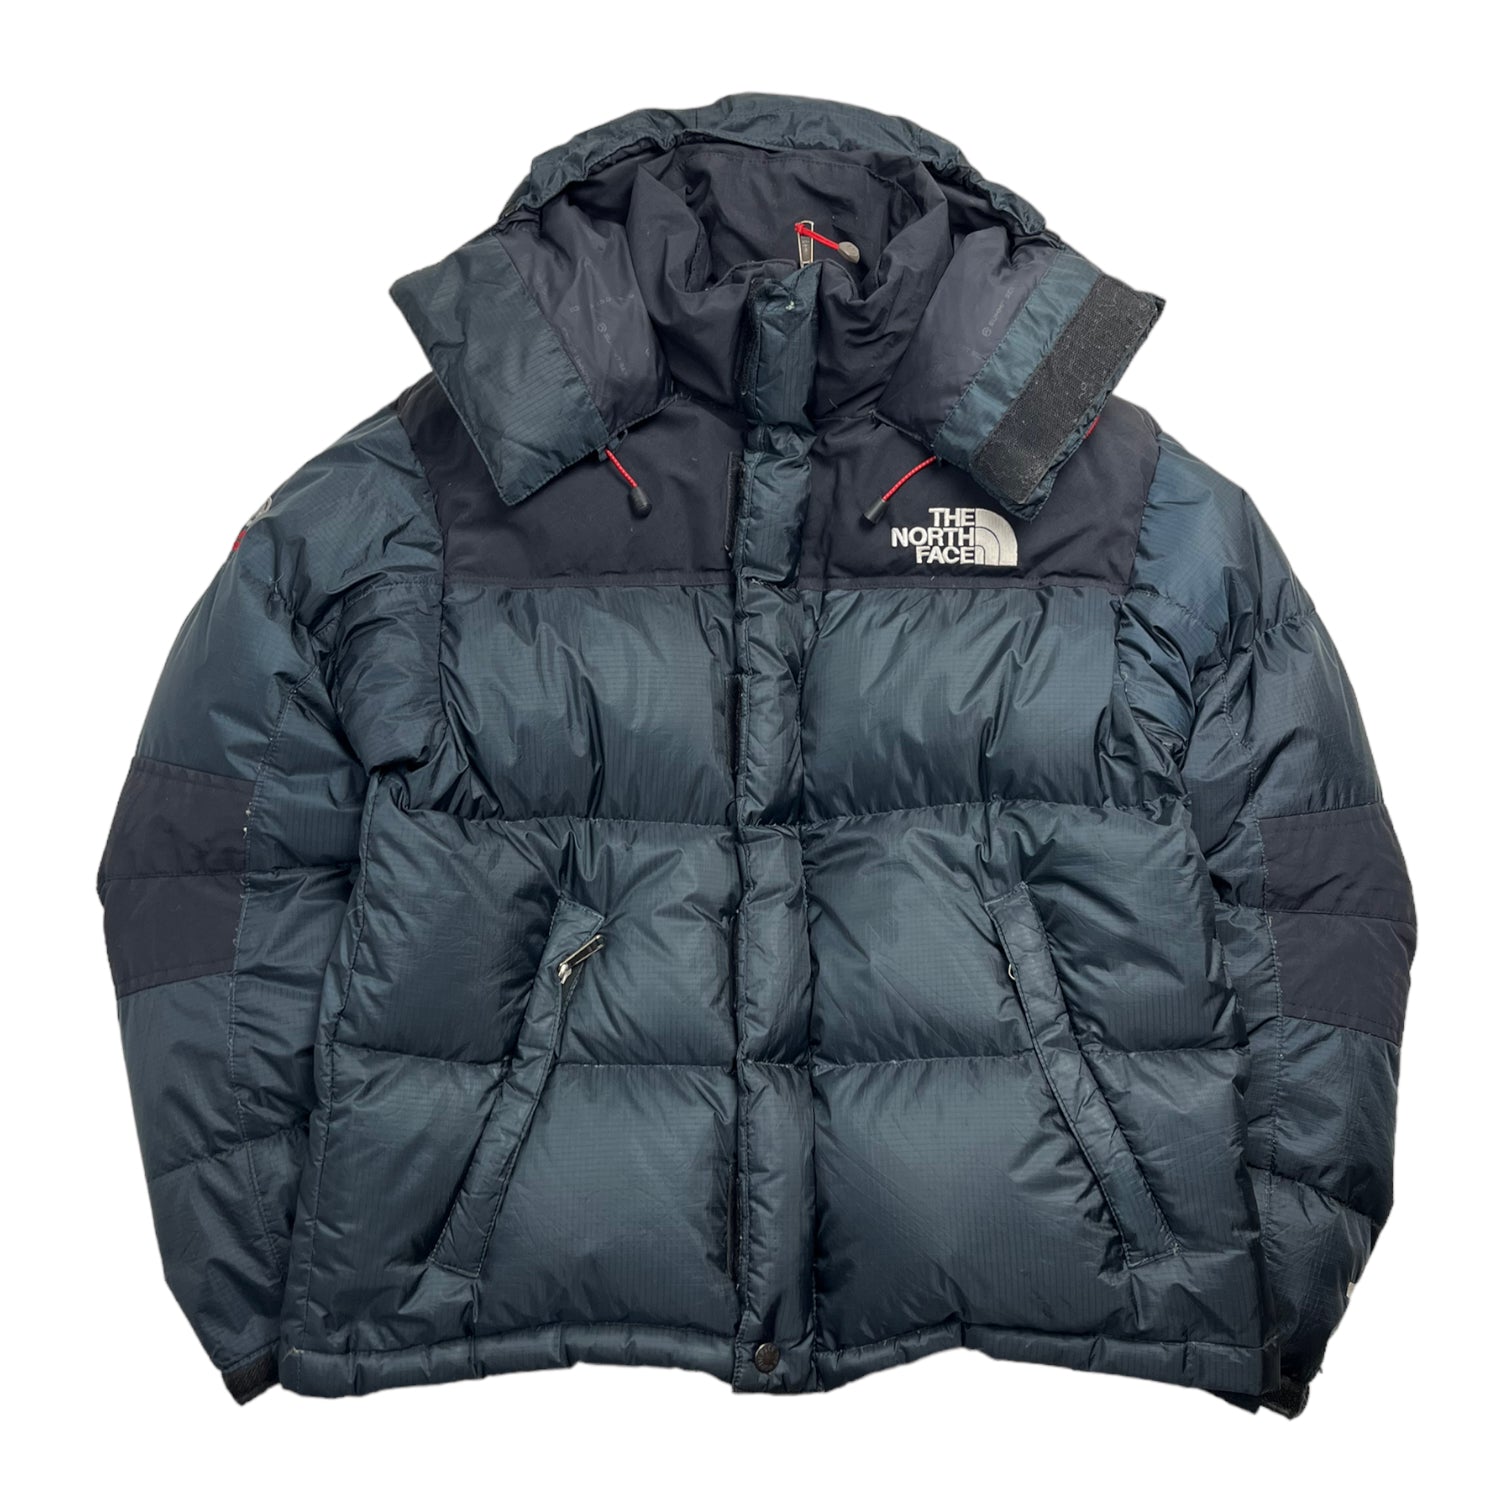 The North Face Hooded 700 Summit Series Puffer Jacket